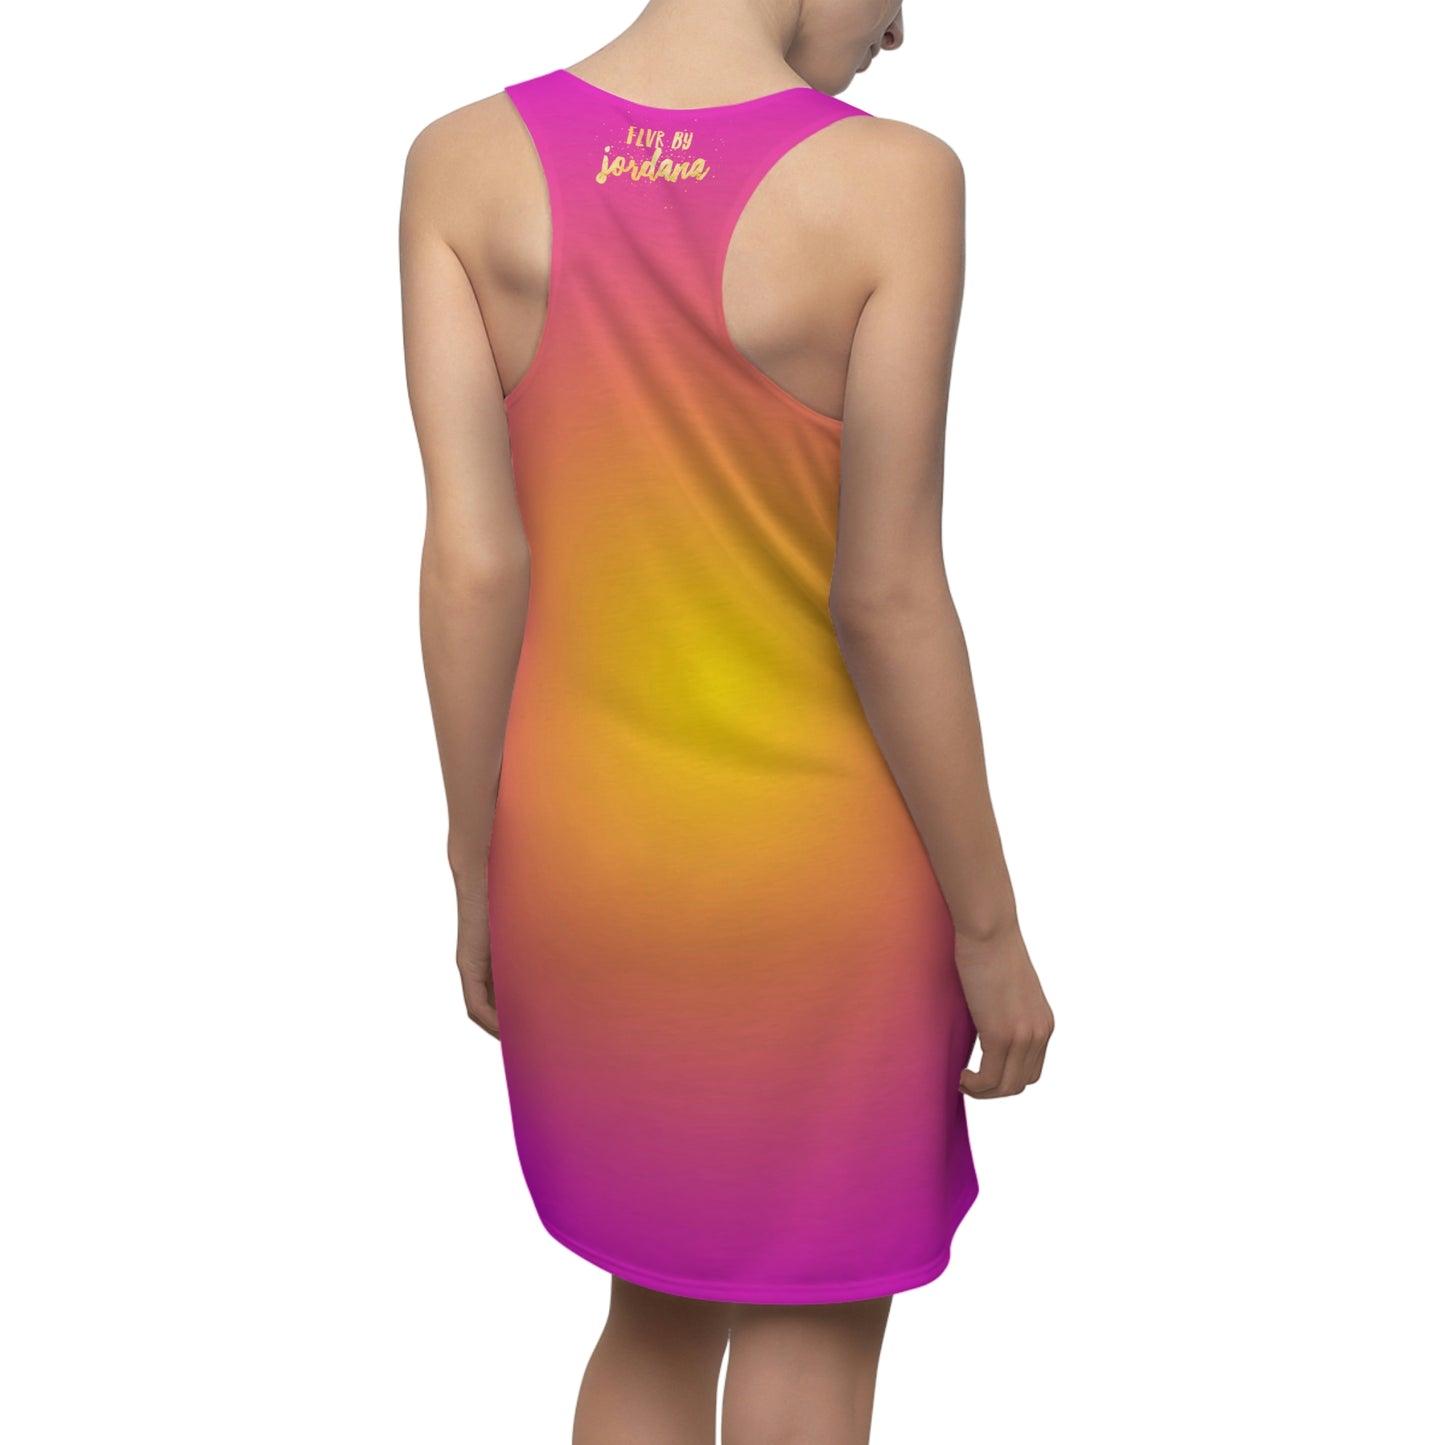 The Tropical Punch Racerback Dress